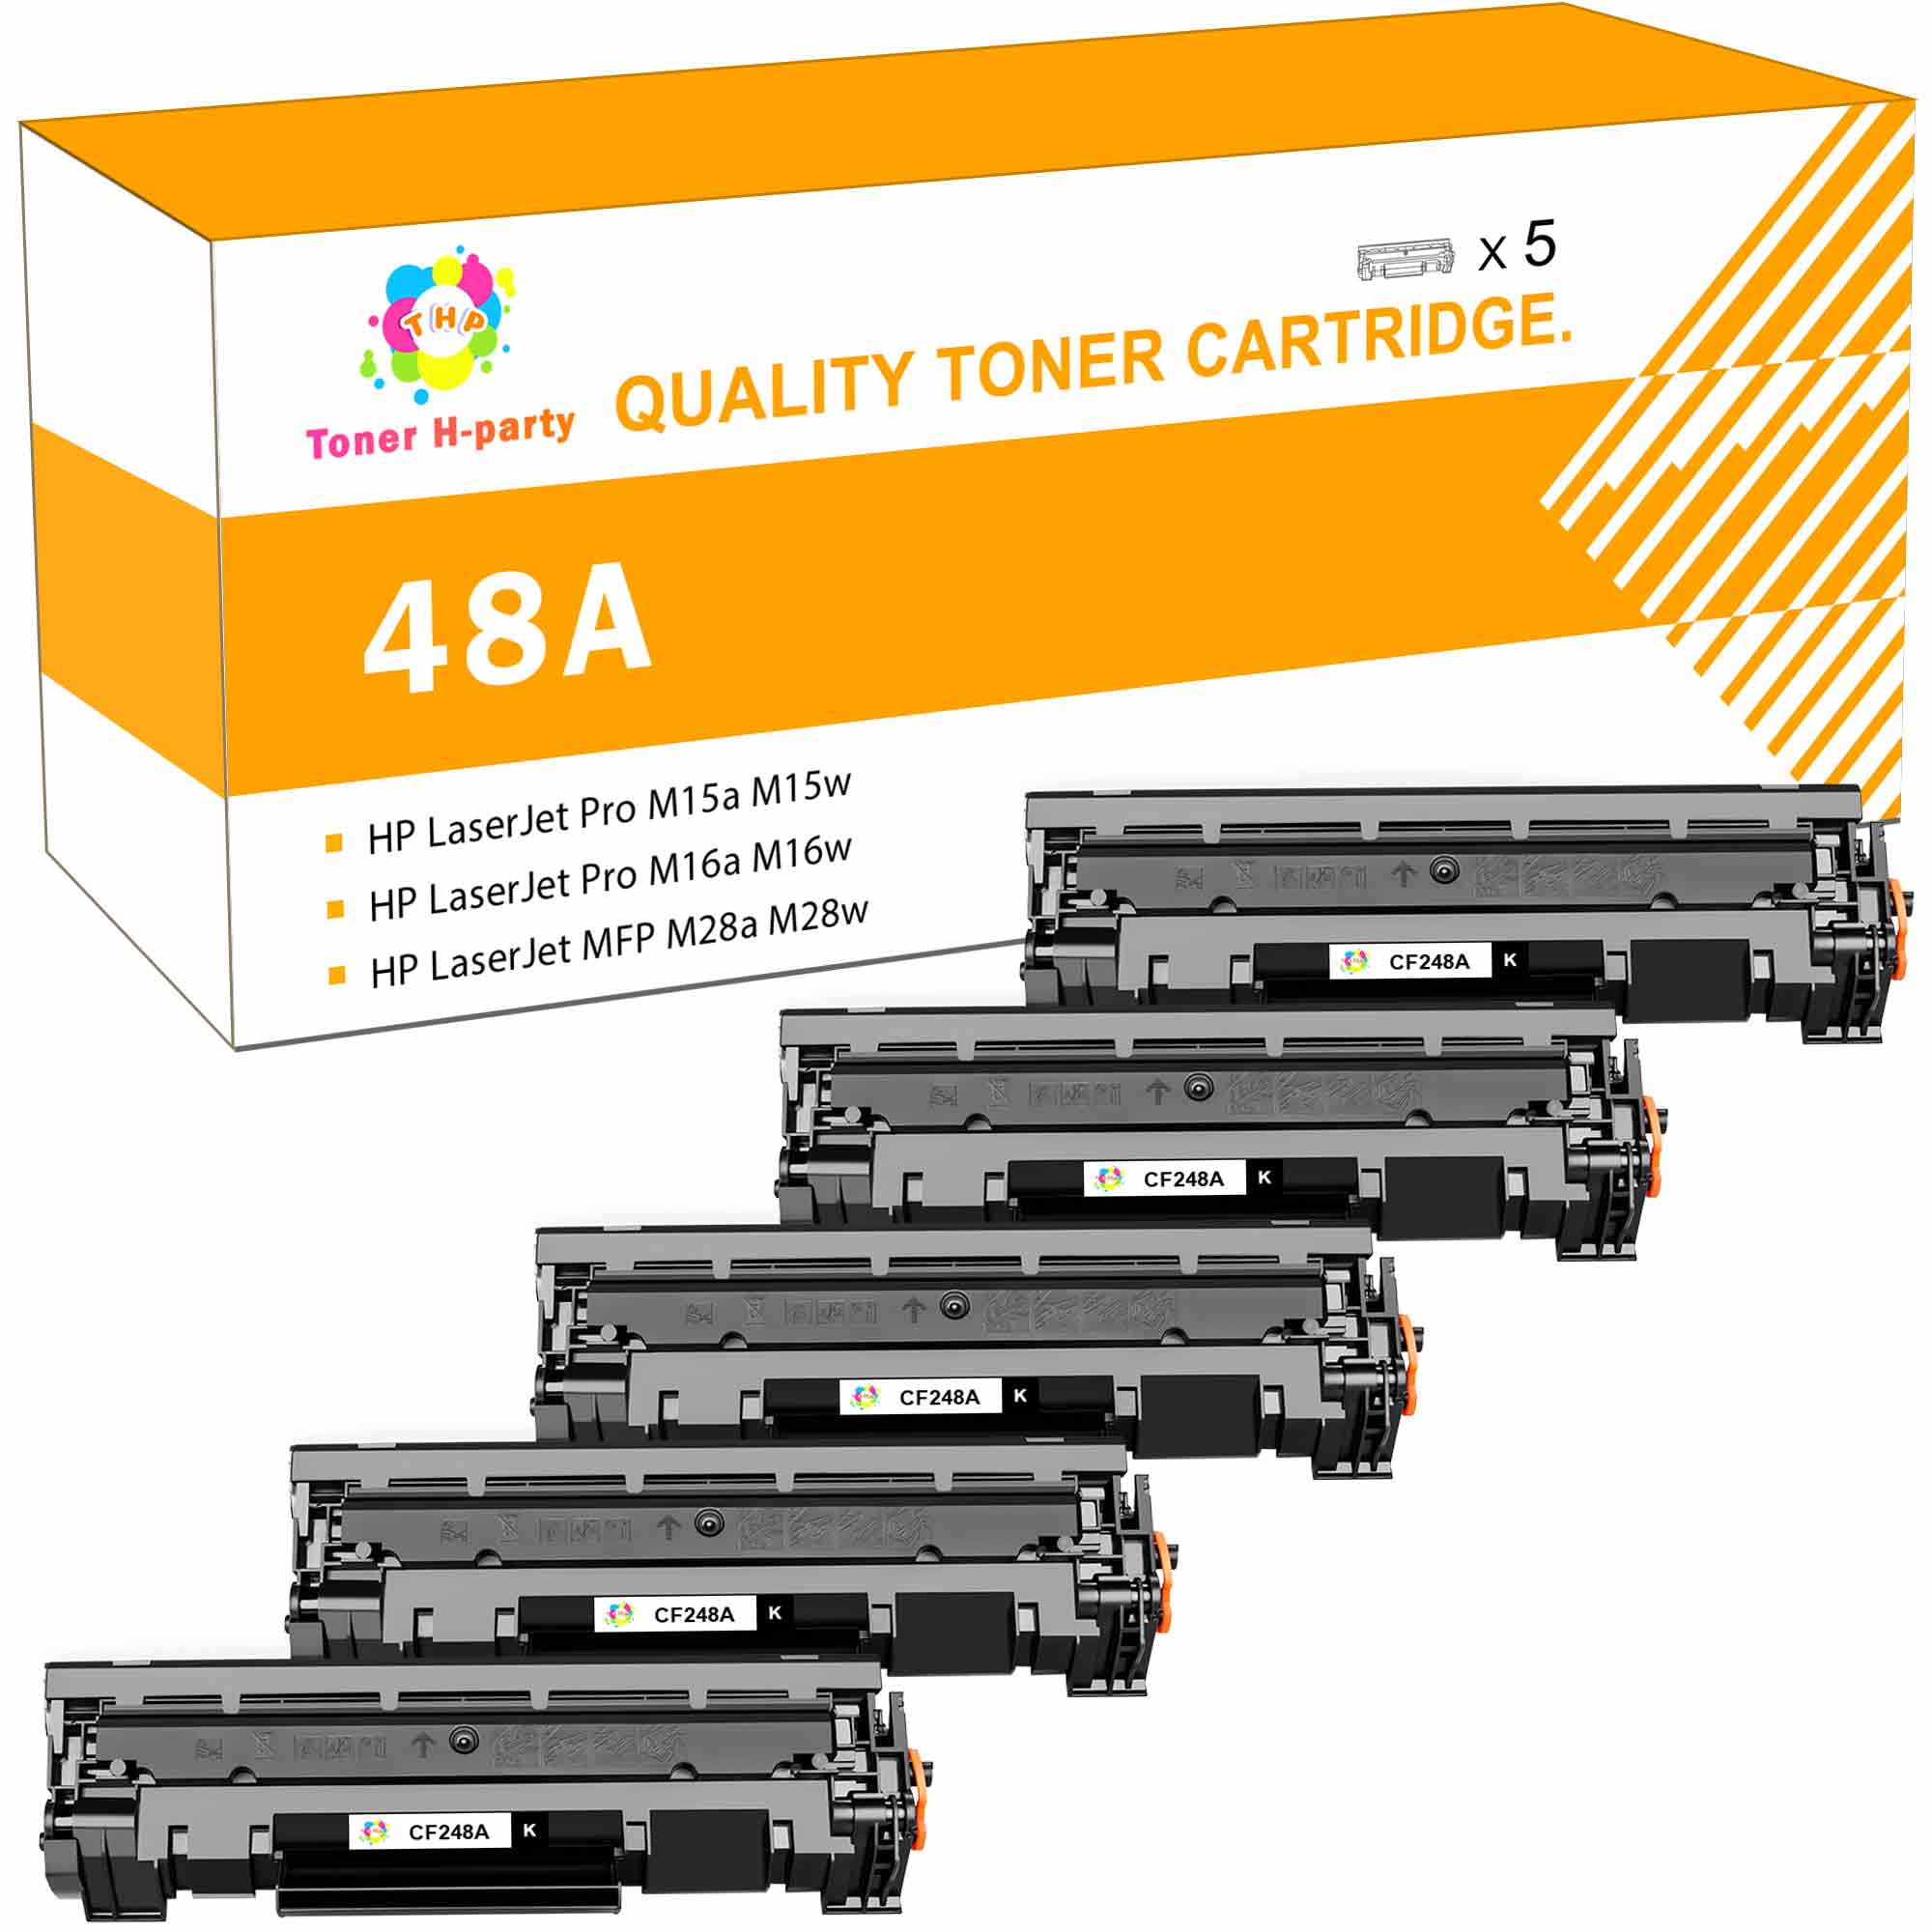 CF248A Black Toner Cartridge Replacement for Laserjet Pro M15a M15w MFP M28a MFP M28w MFP M29w MFP M30w MFP M31w Printer Ink Cartridge 1 Pack 48A Toner Compatible for HP 48A